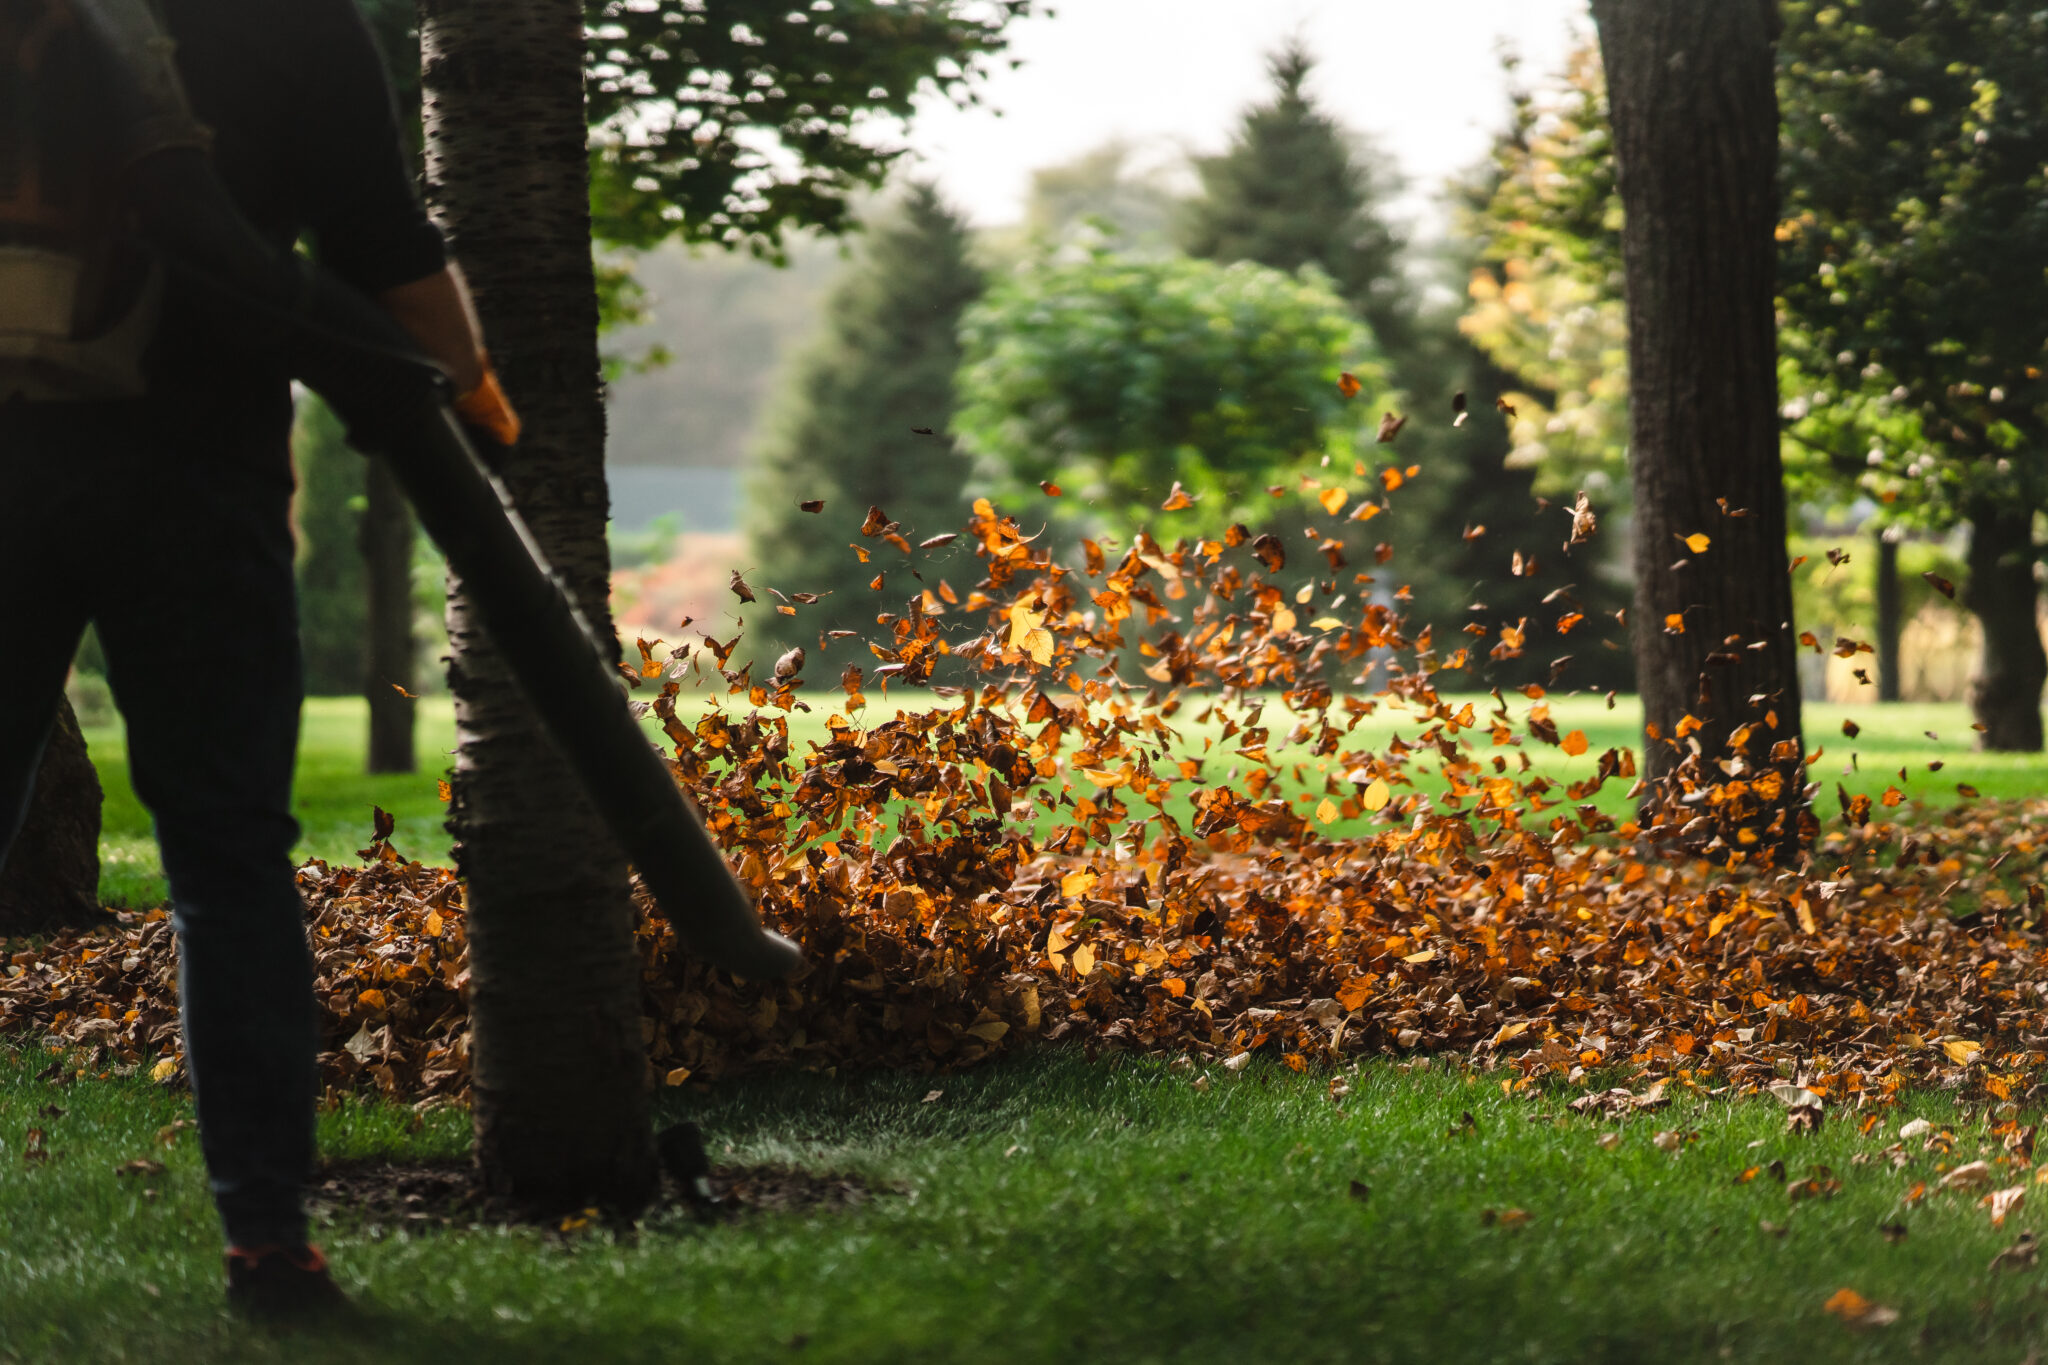 A woman operating a heavy duty leaf blower. Leaves being swirled up